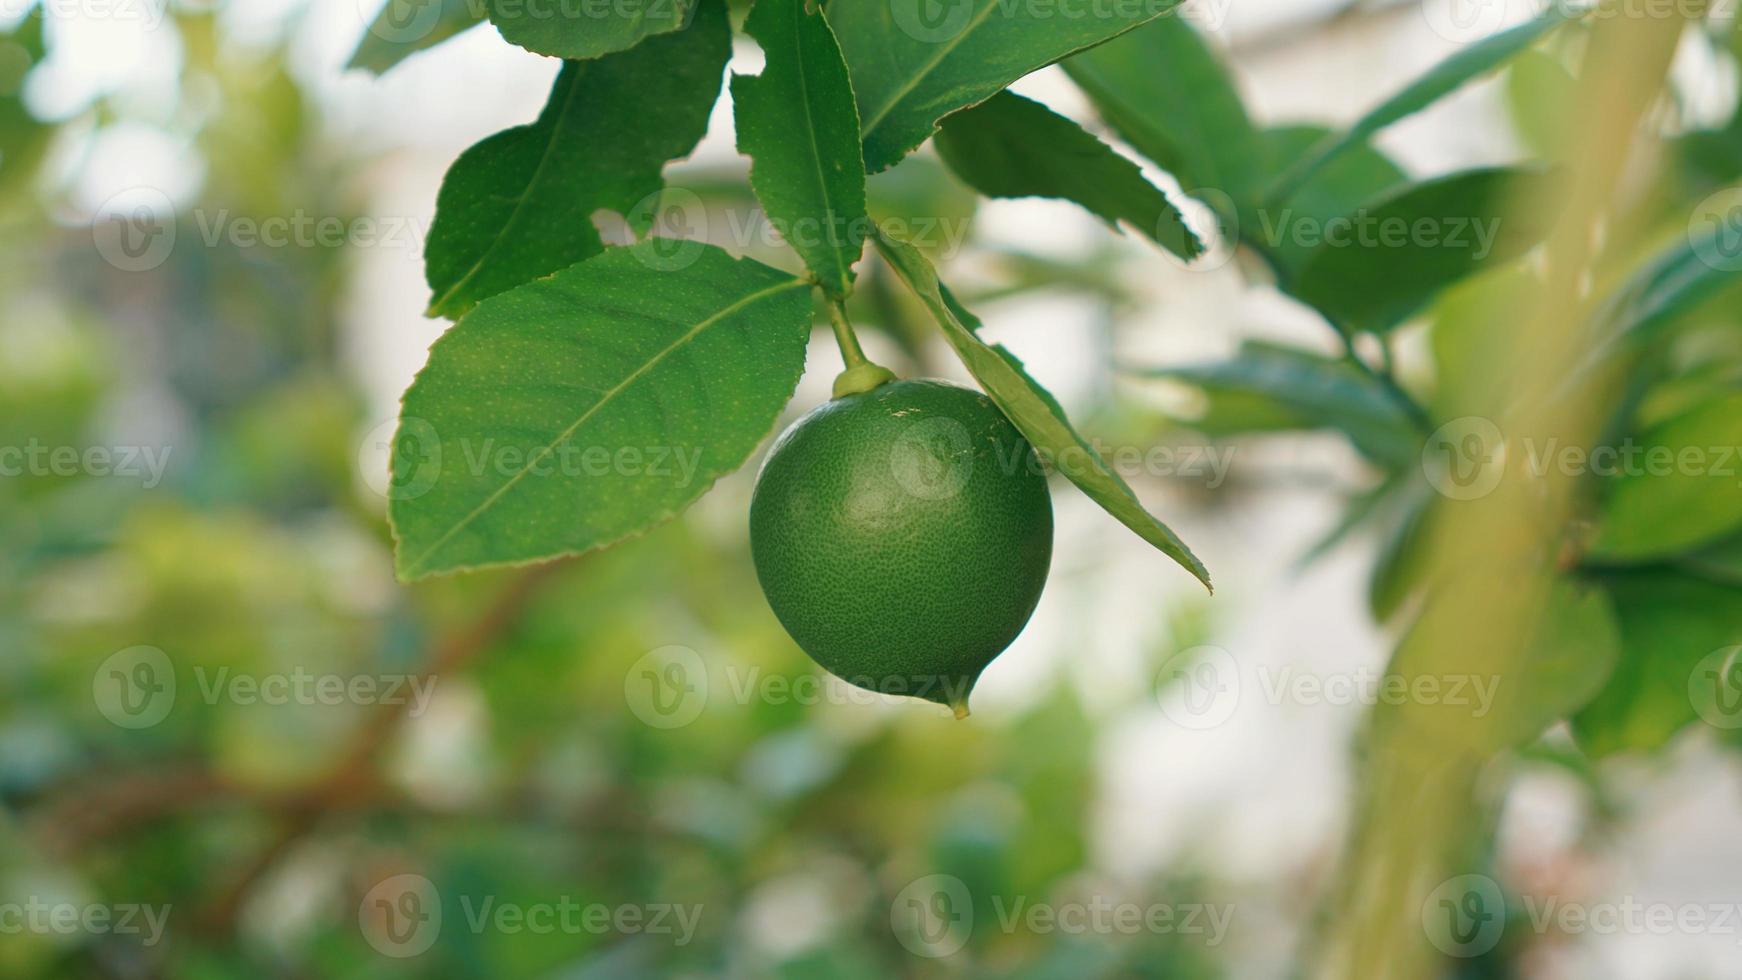 A lime in the morning. the green color is cool photo